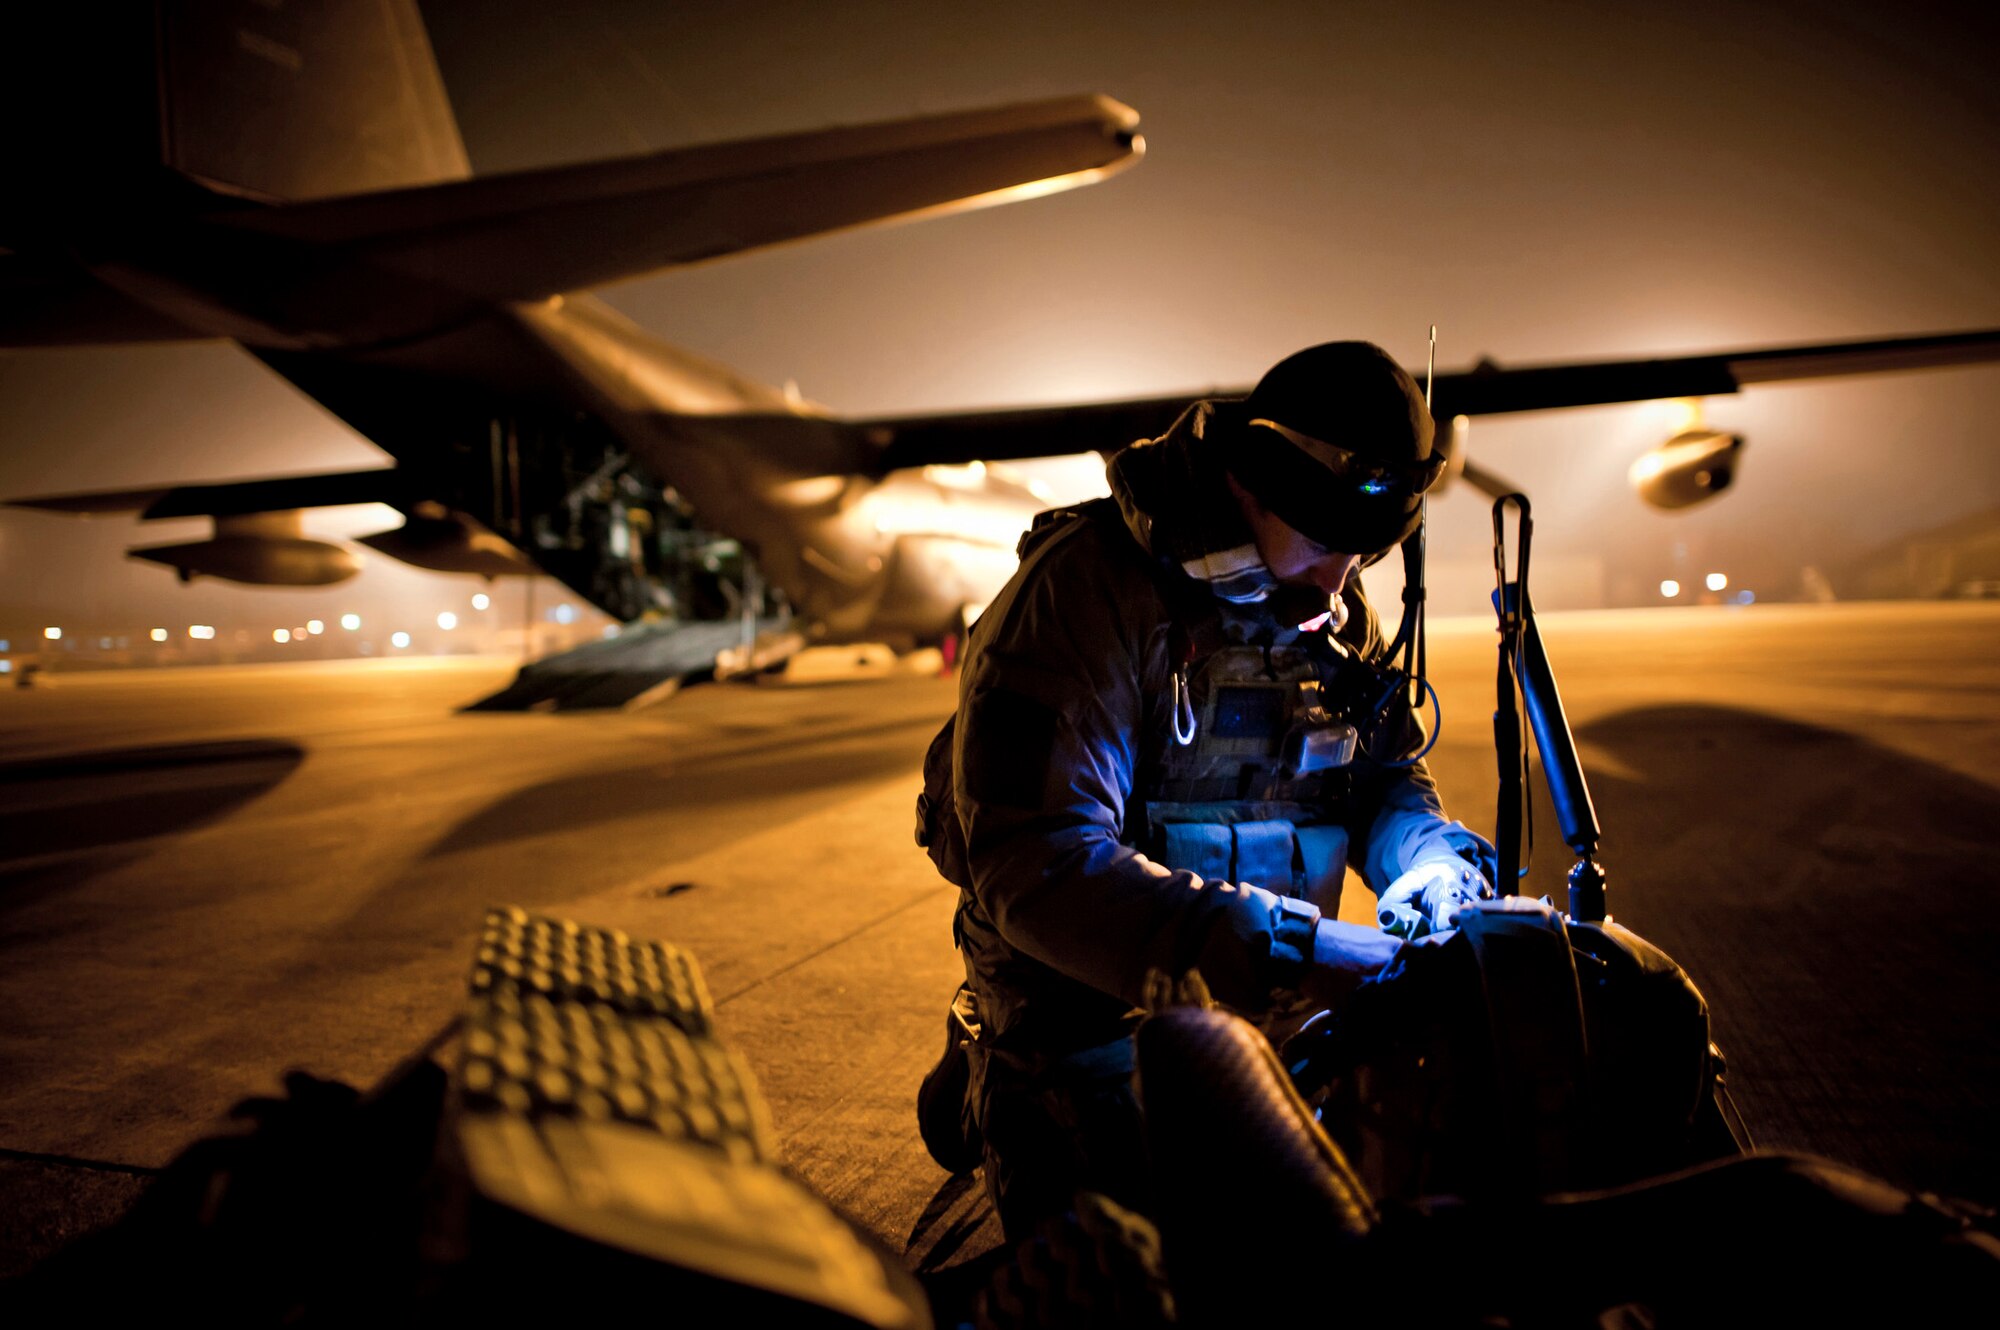 Tech. Sgt. Ray Decker prepares his rucksack prior to boarding an MC-130P Combat Shadow on March 16, 2011, at Yokota Air Base, Japan. Decker is from the 320th Special Tactics Squadron at Kadena AB, Japan. (U.S. Air Force photo/Staff Sgt. Samuel Morse)